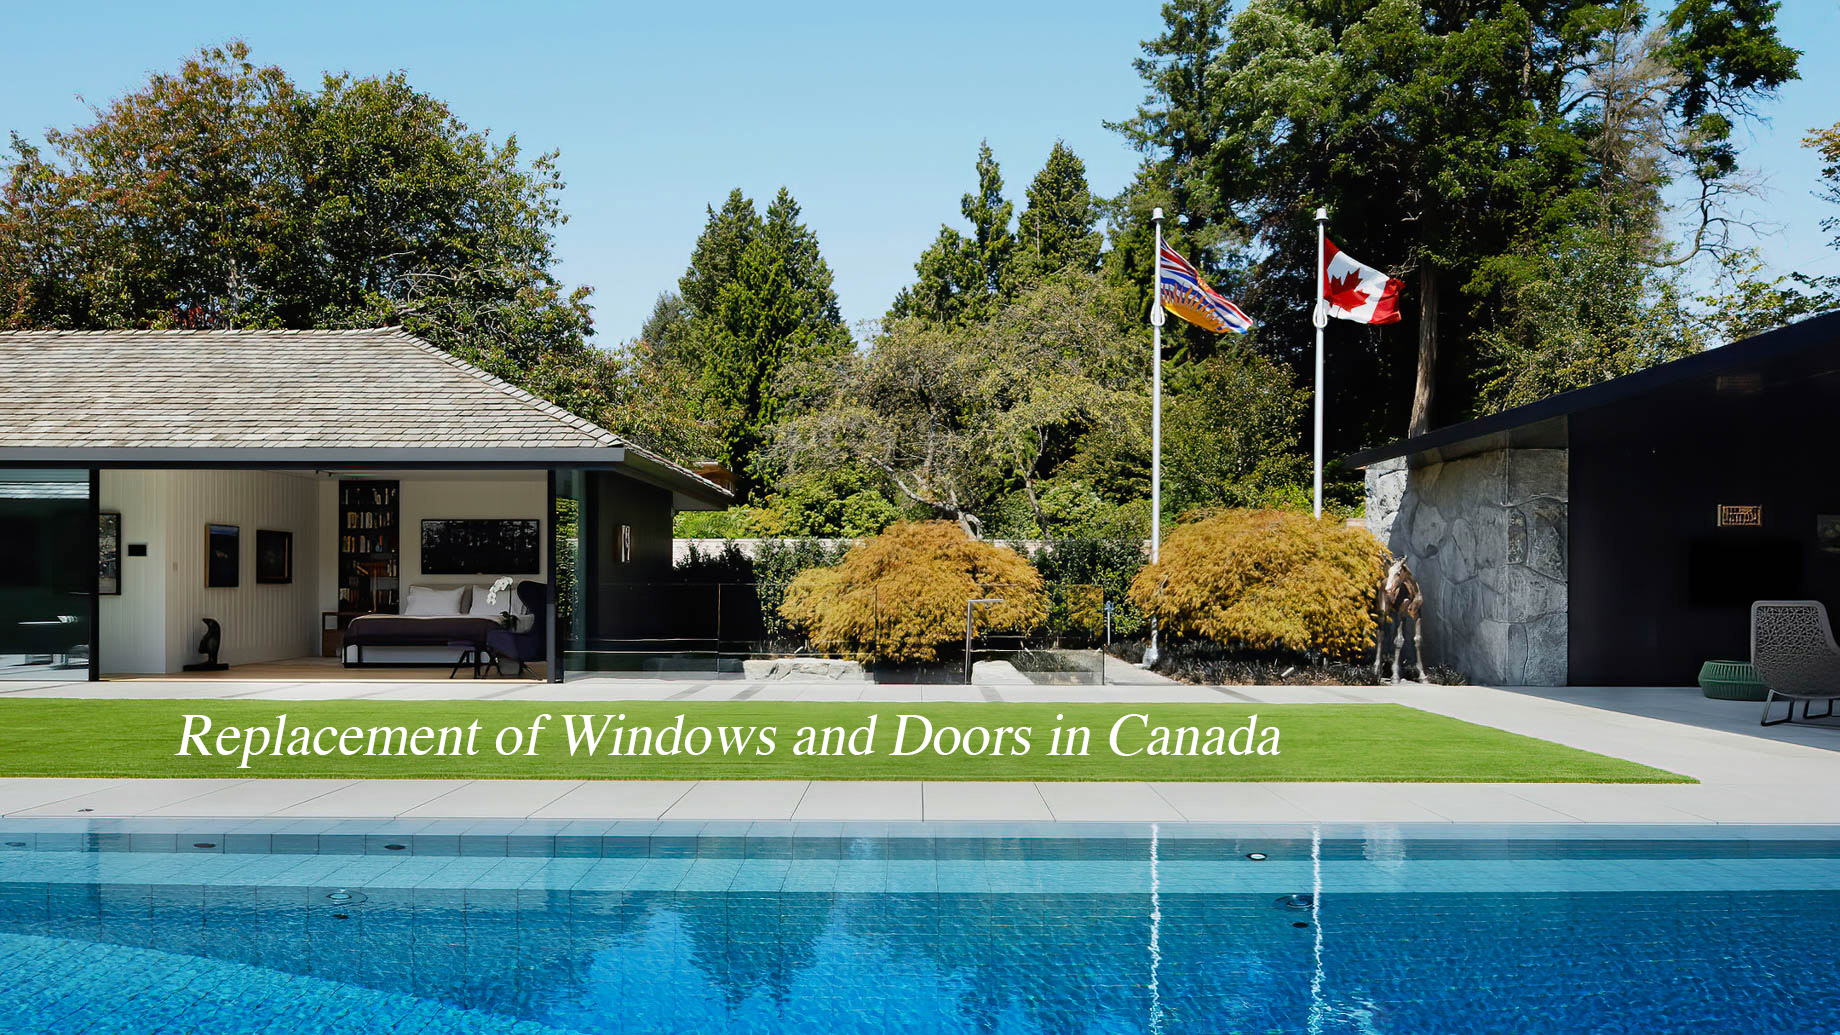 Replacement of Windows and Doors in Canada - Tips and Case Studies